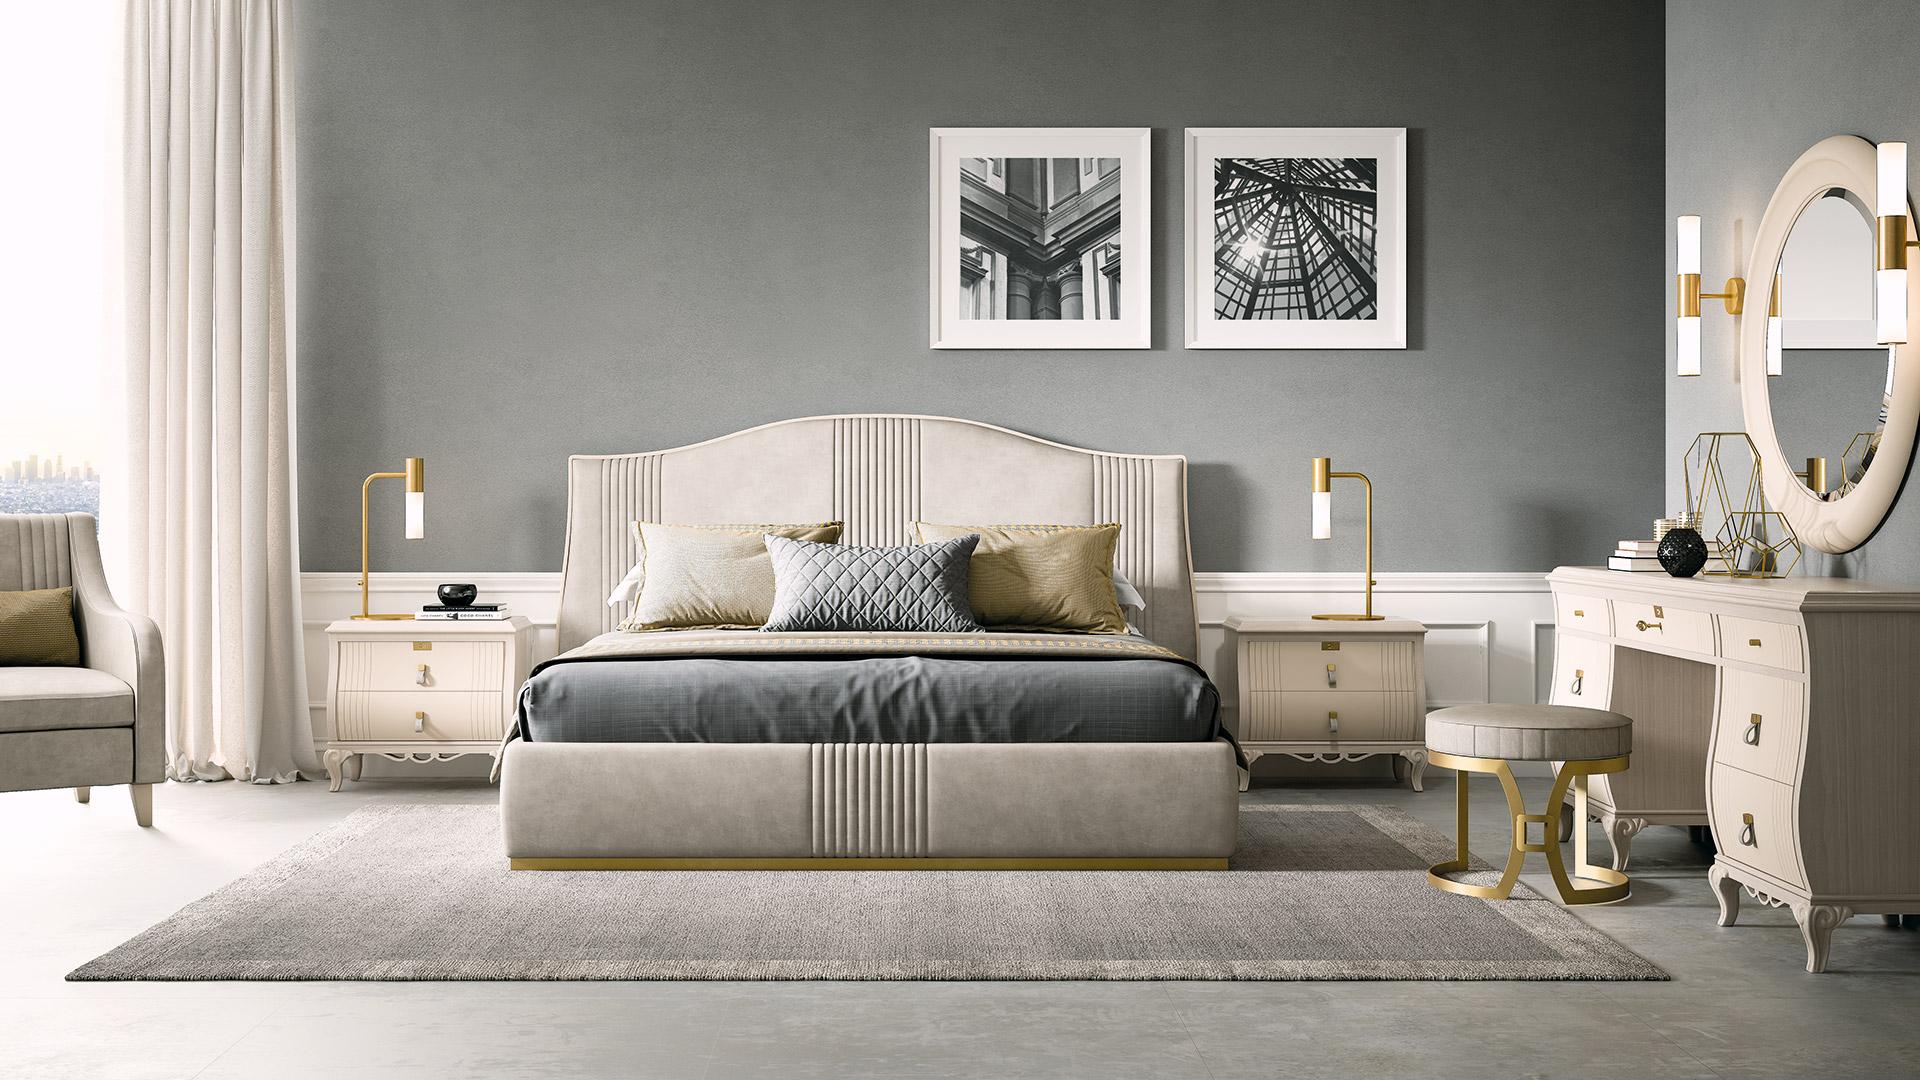 Padded bed. Mattress measures 180 x 200cm. Characterized by beautiful headboard with curved design and vertical pipeline stitching.
The sommier is upholstered with a metal golden finished base and enriched by vertical stitchings on the front.
The